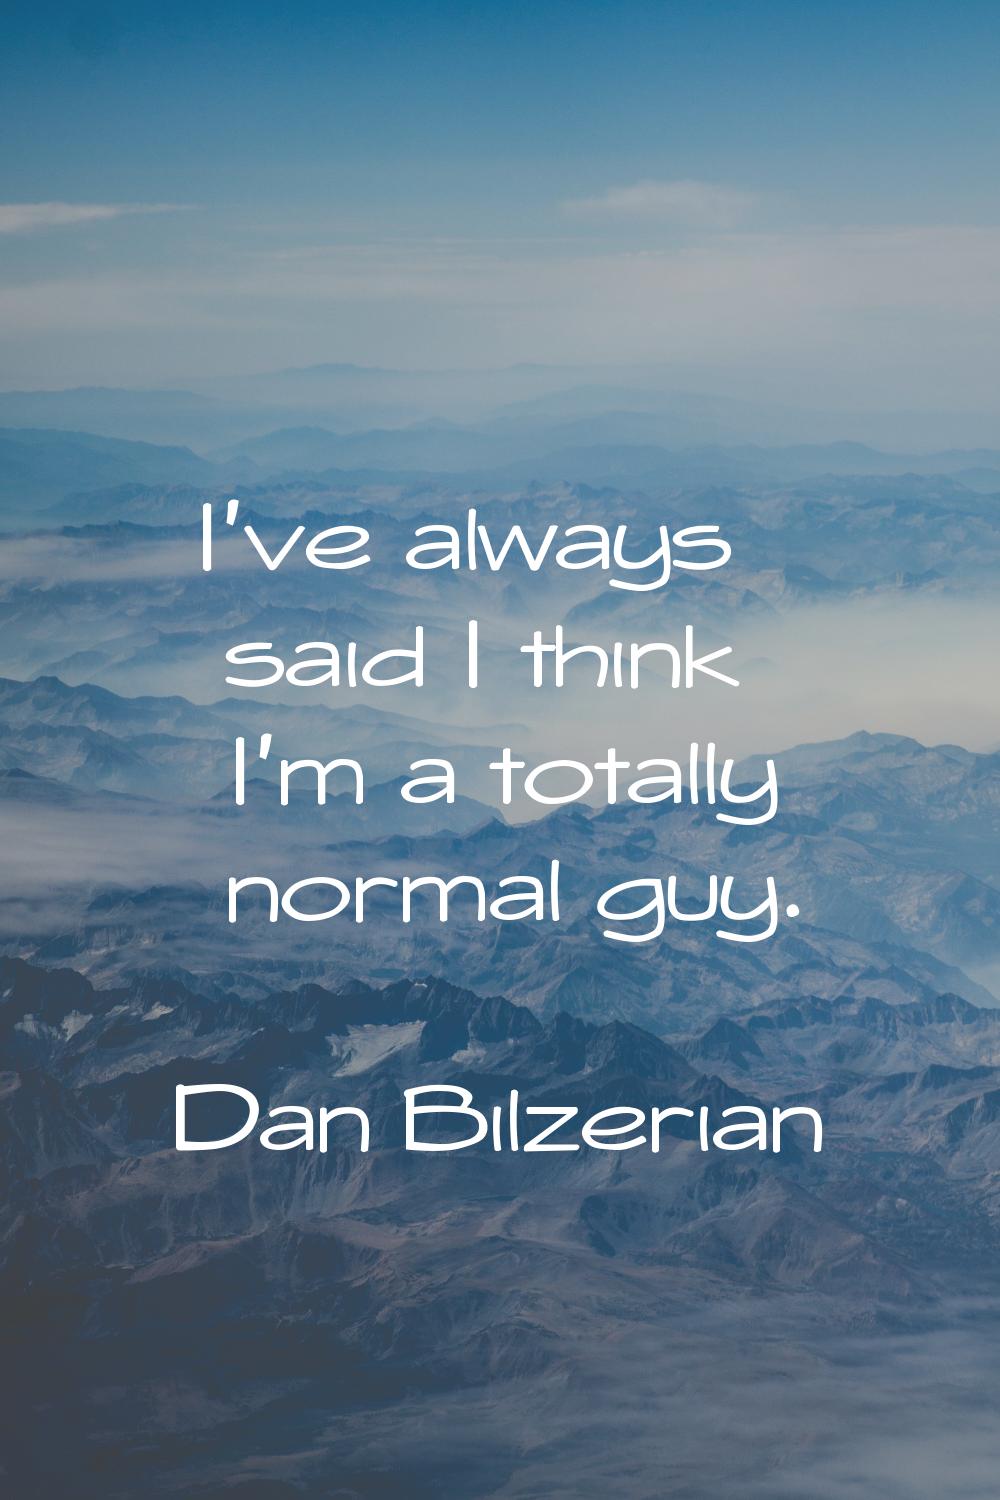 I've always said I think I'm a totally normal guy.